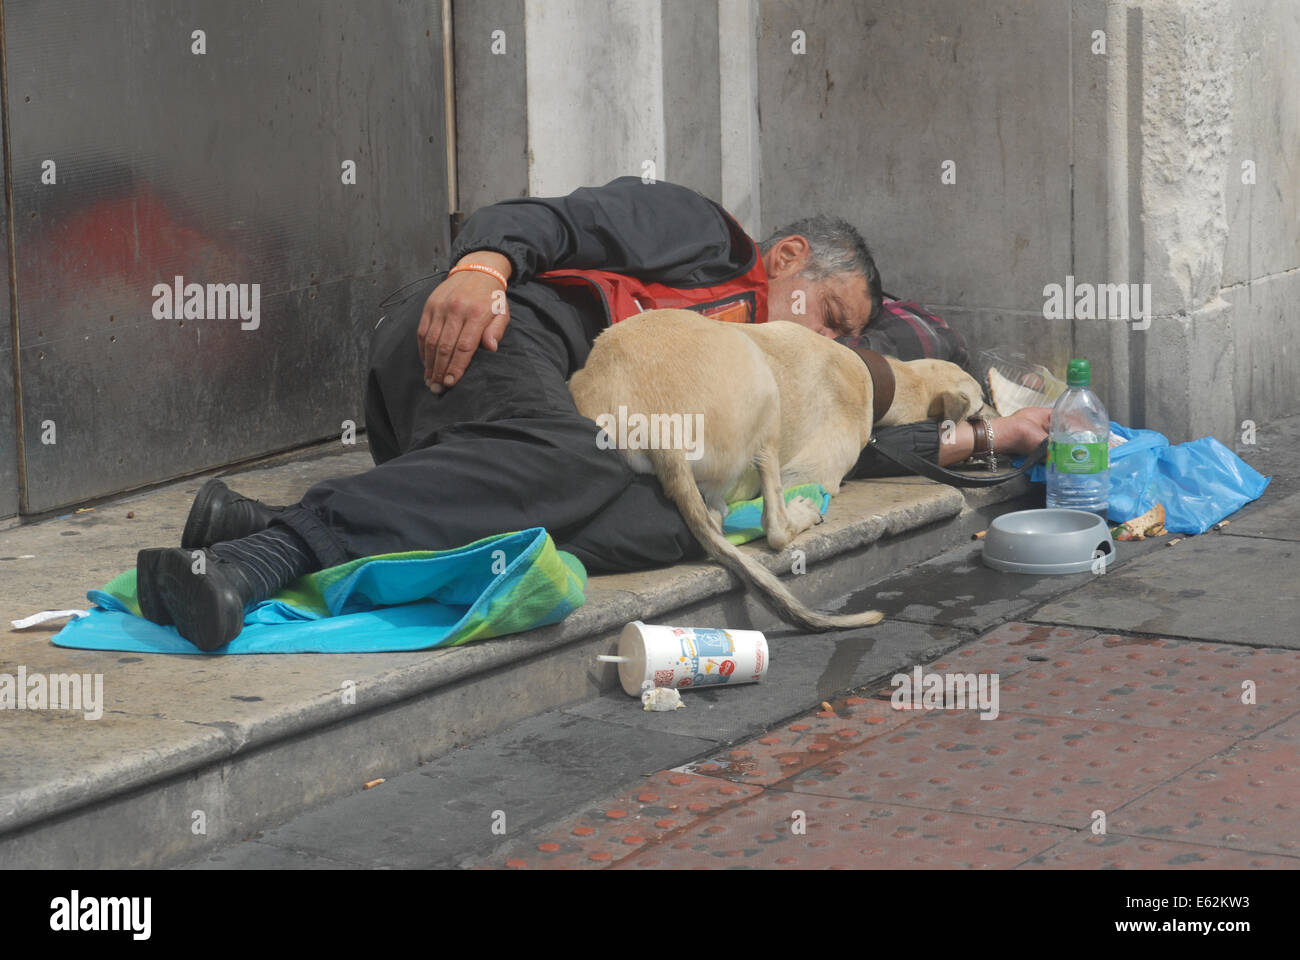 London, UK, 12 August 2014, Homeless man, a Big Issue seller  and his dog on the streets of London. Stock Photo